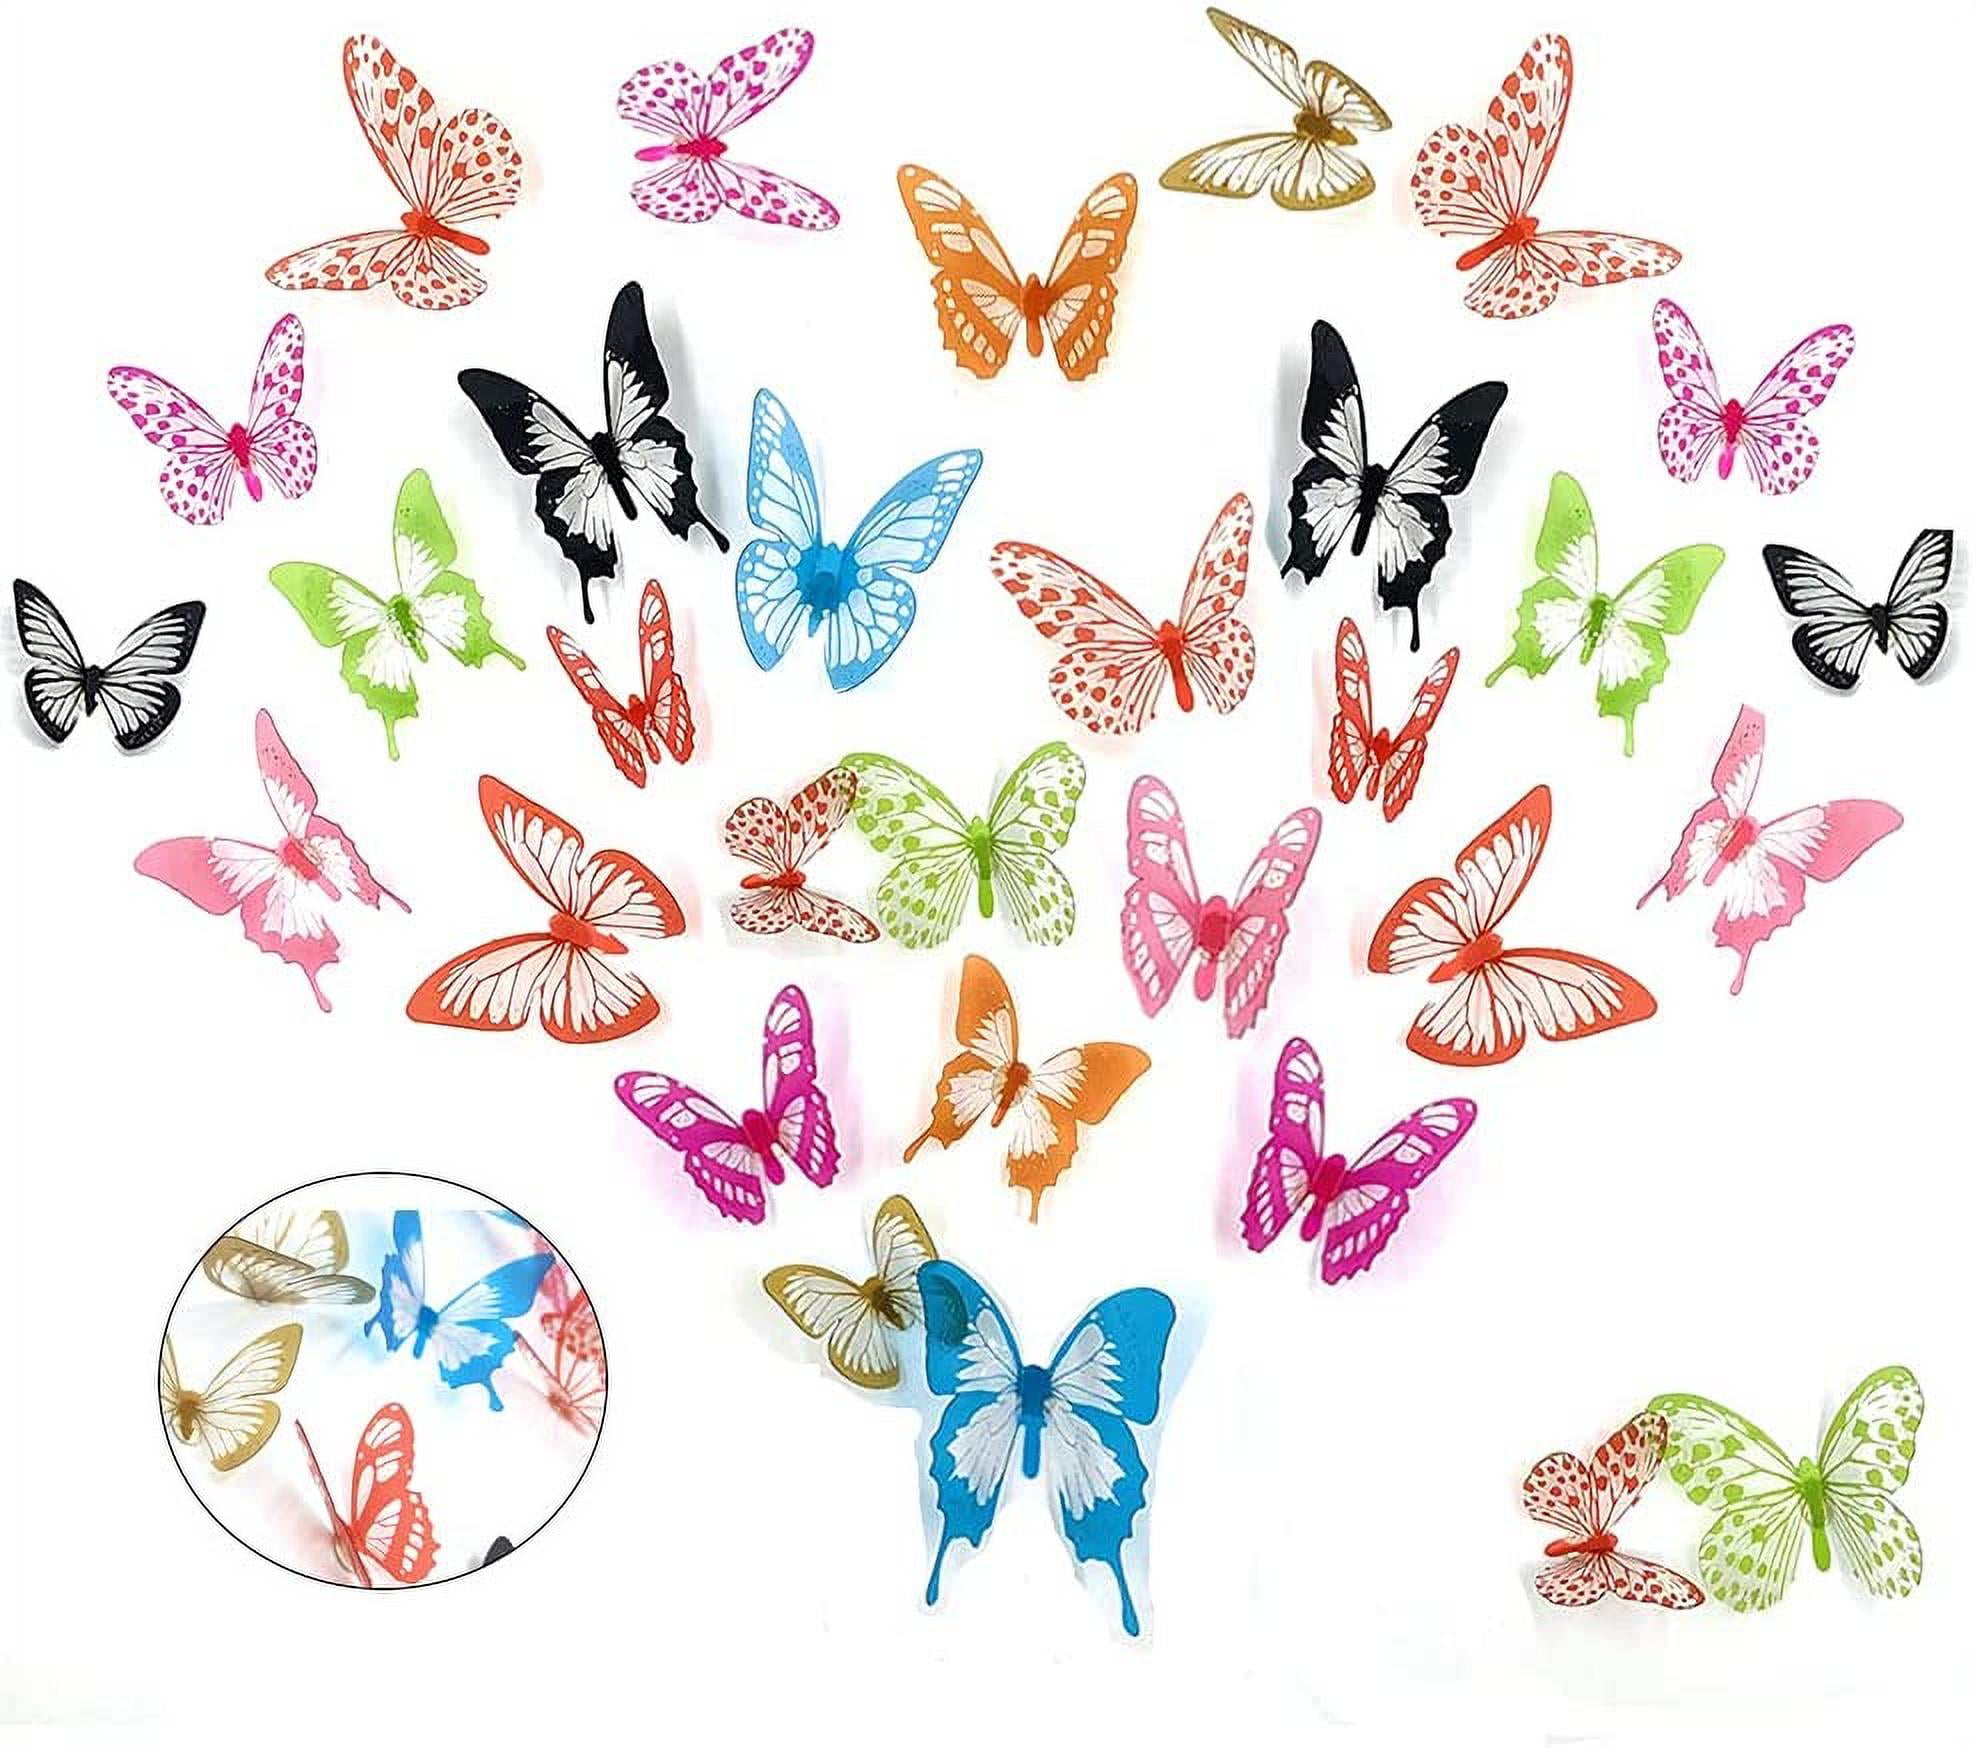 72 Pcs 3D Butterfly Wall Stickers,Black-White Style Butterfly Wall Decals,for Party Bedroom Wall Stickers Decor